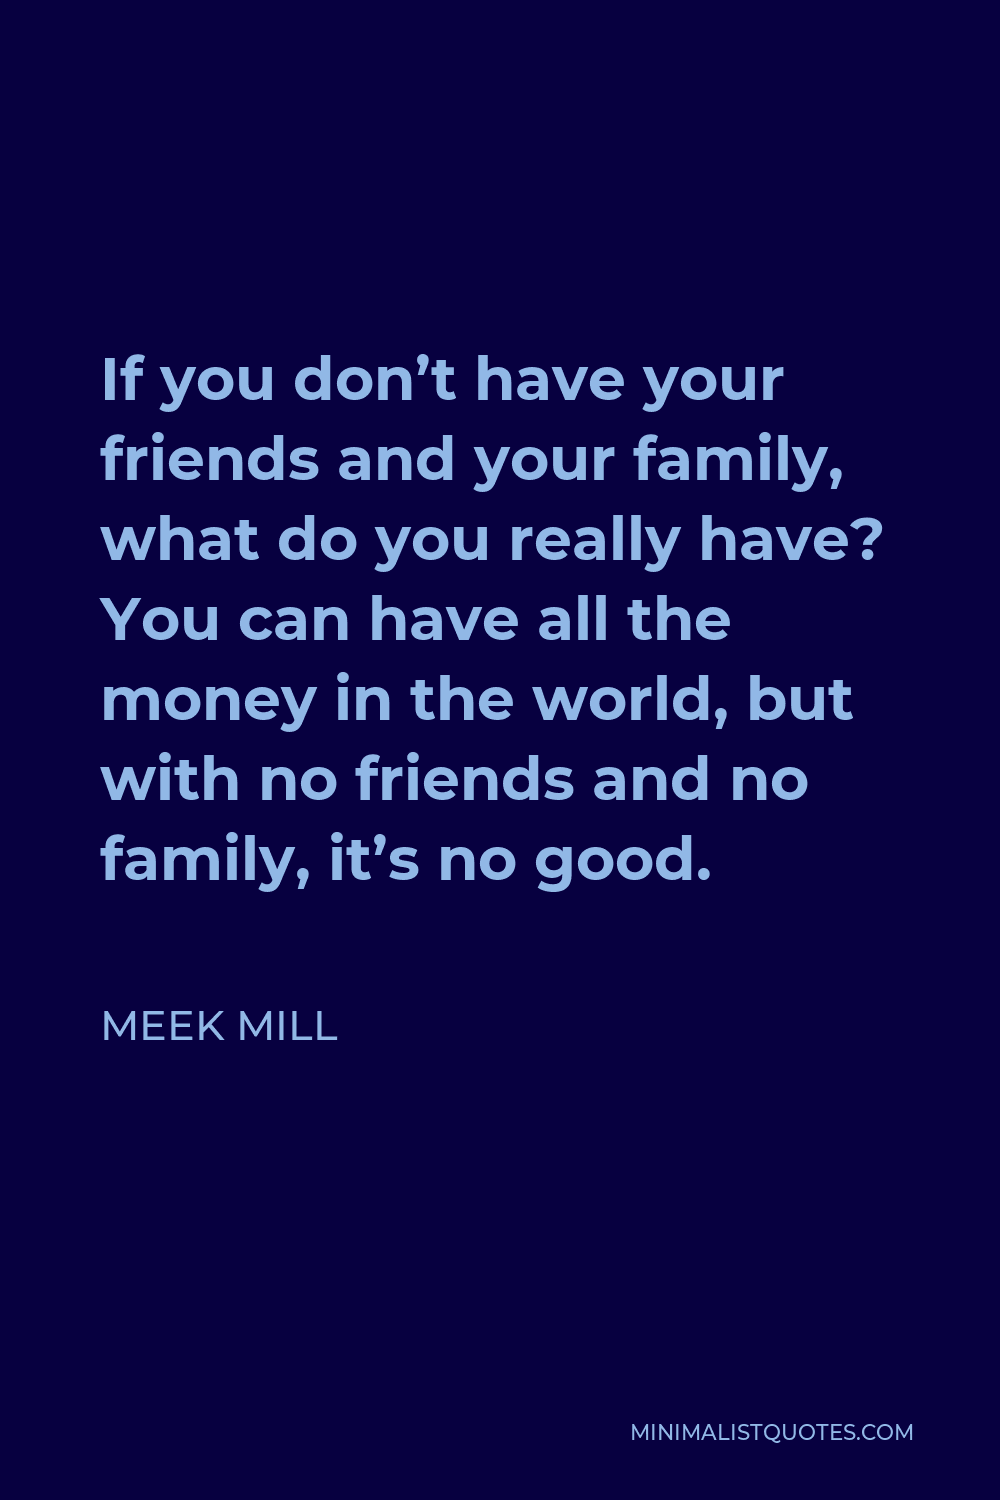 Meek Mill Quote - If you don’t have your friends and your family, what do you really have? You can have all the money in the world, but with no friends and no family, it’s no good.